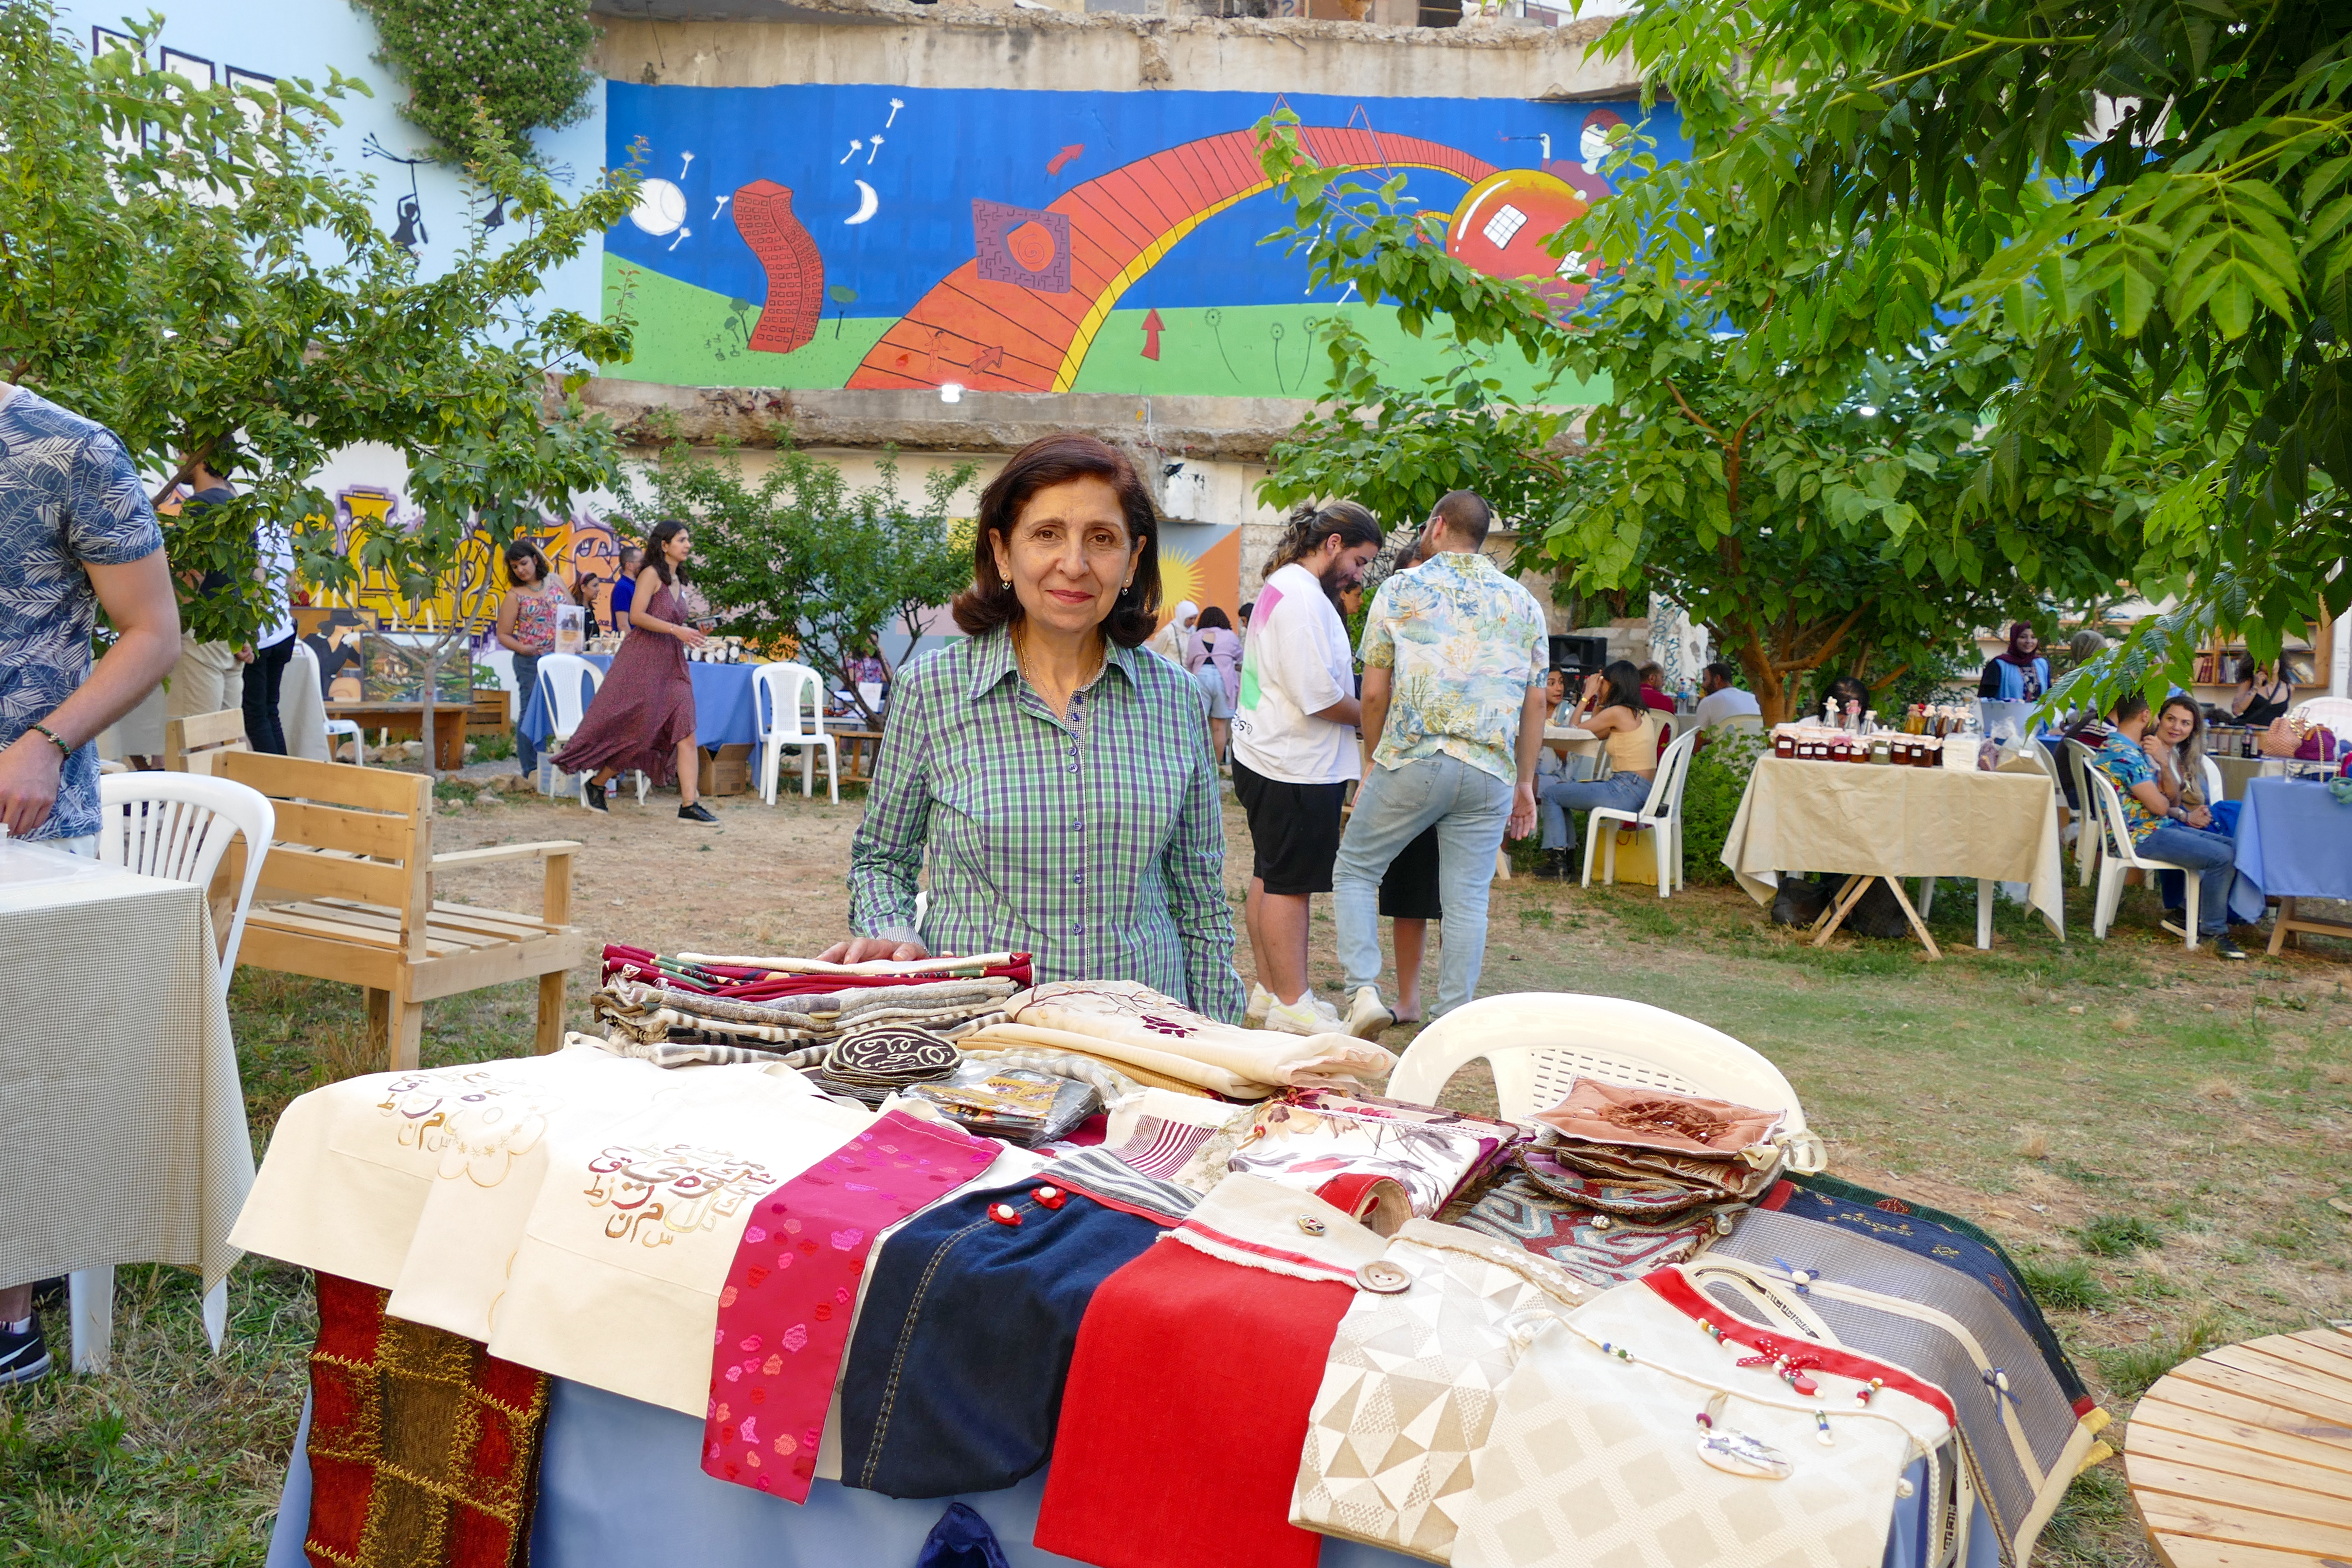 Vendor at a market event held in Laziza Park, Beirut that was recently reactivated by UN-Habitat in coordination with Rashet Kheir through funding from the Government of Japan.” UN-Habitat Lebanon, 2022